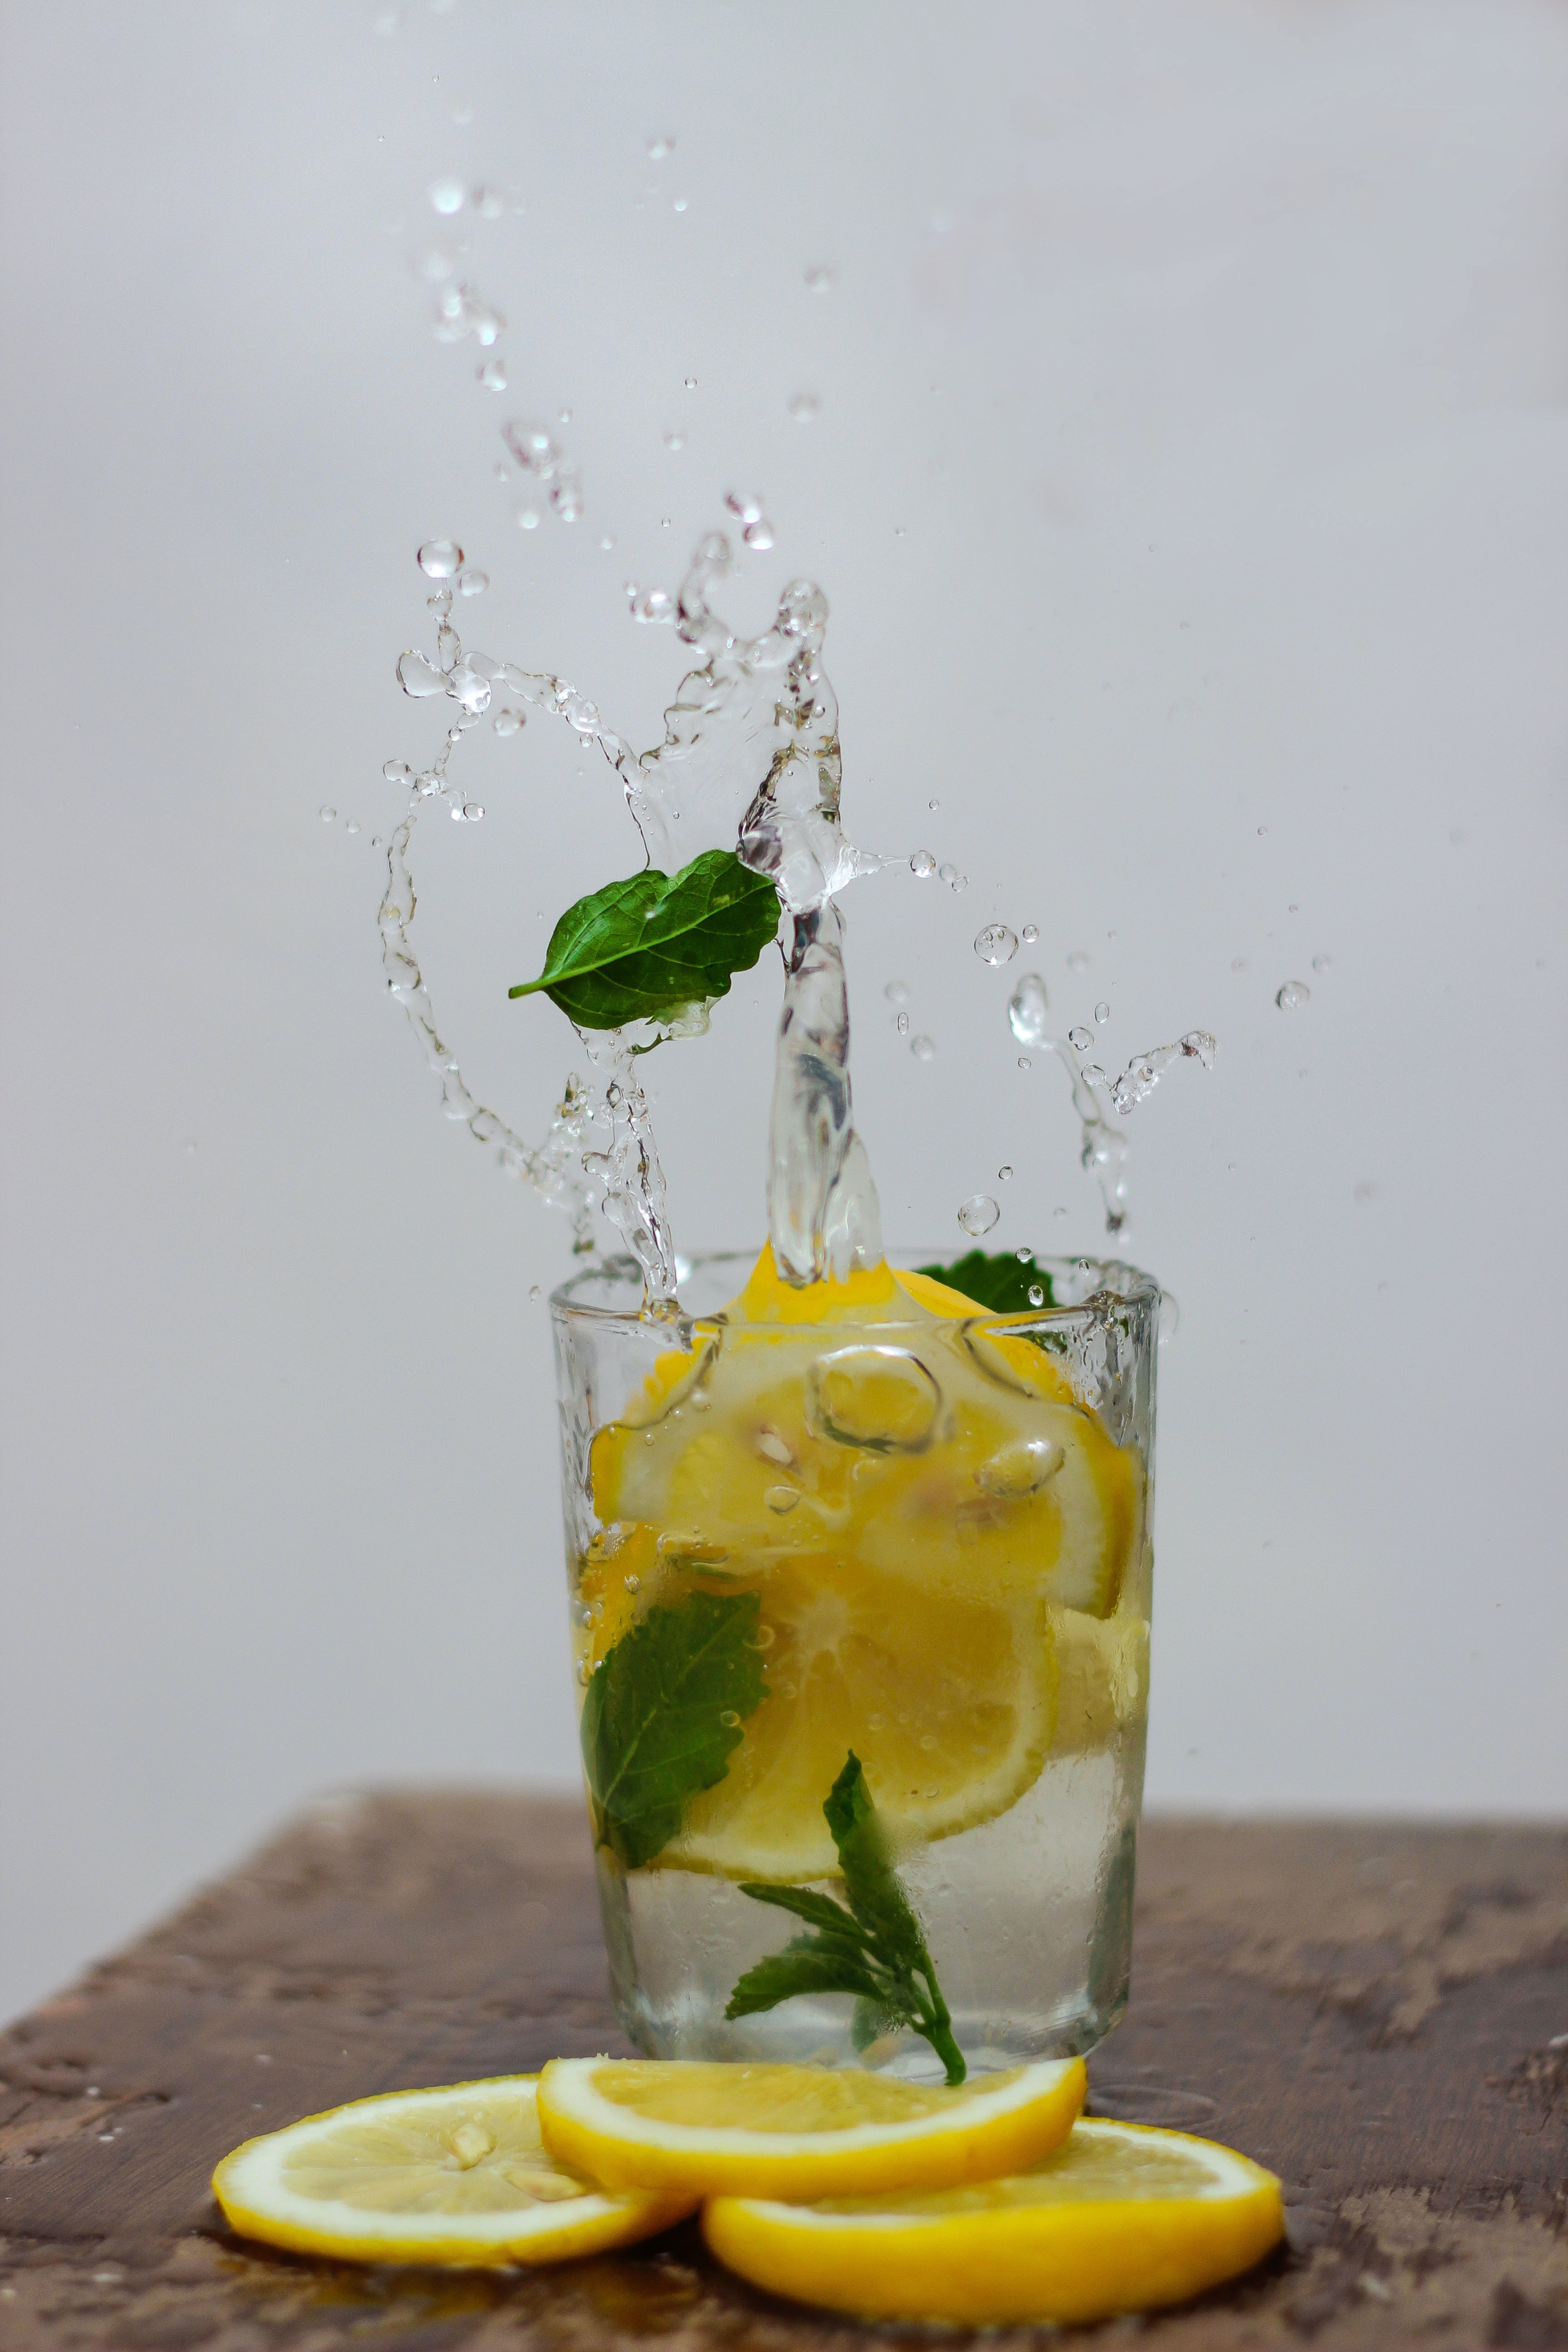 a glass of clear liquid with lemon and mint